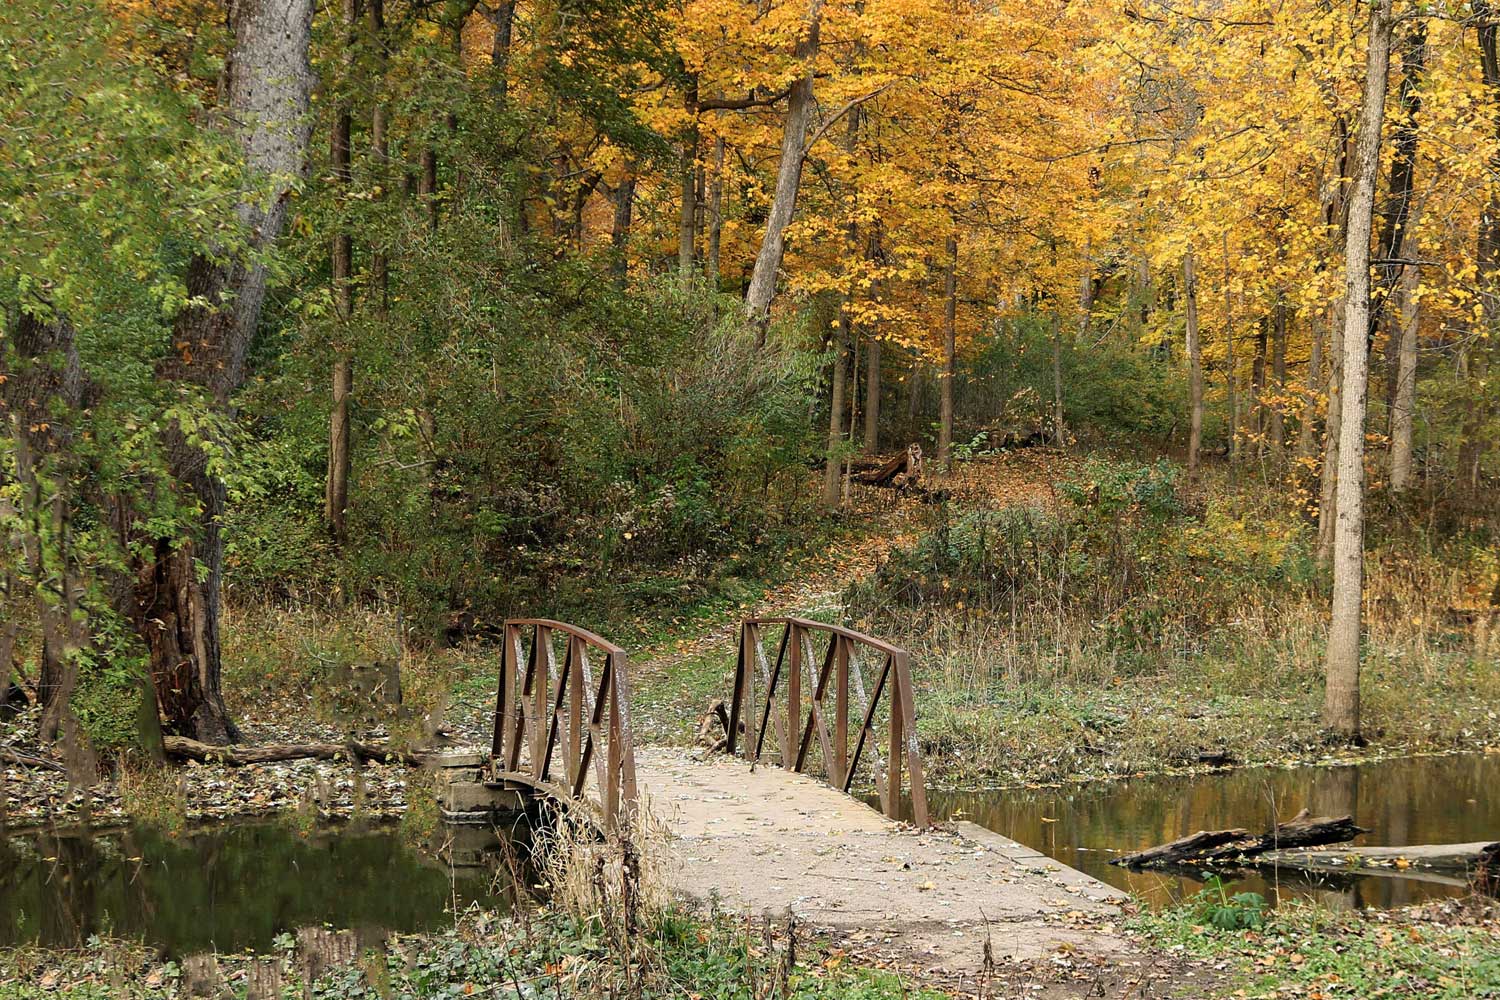 A bridge spanning a creek in a forest with fall colors of orange and yellow.